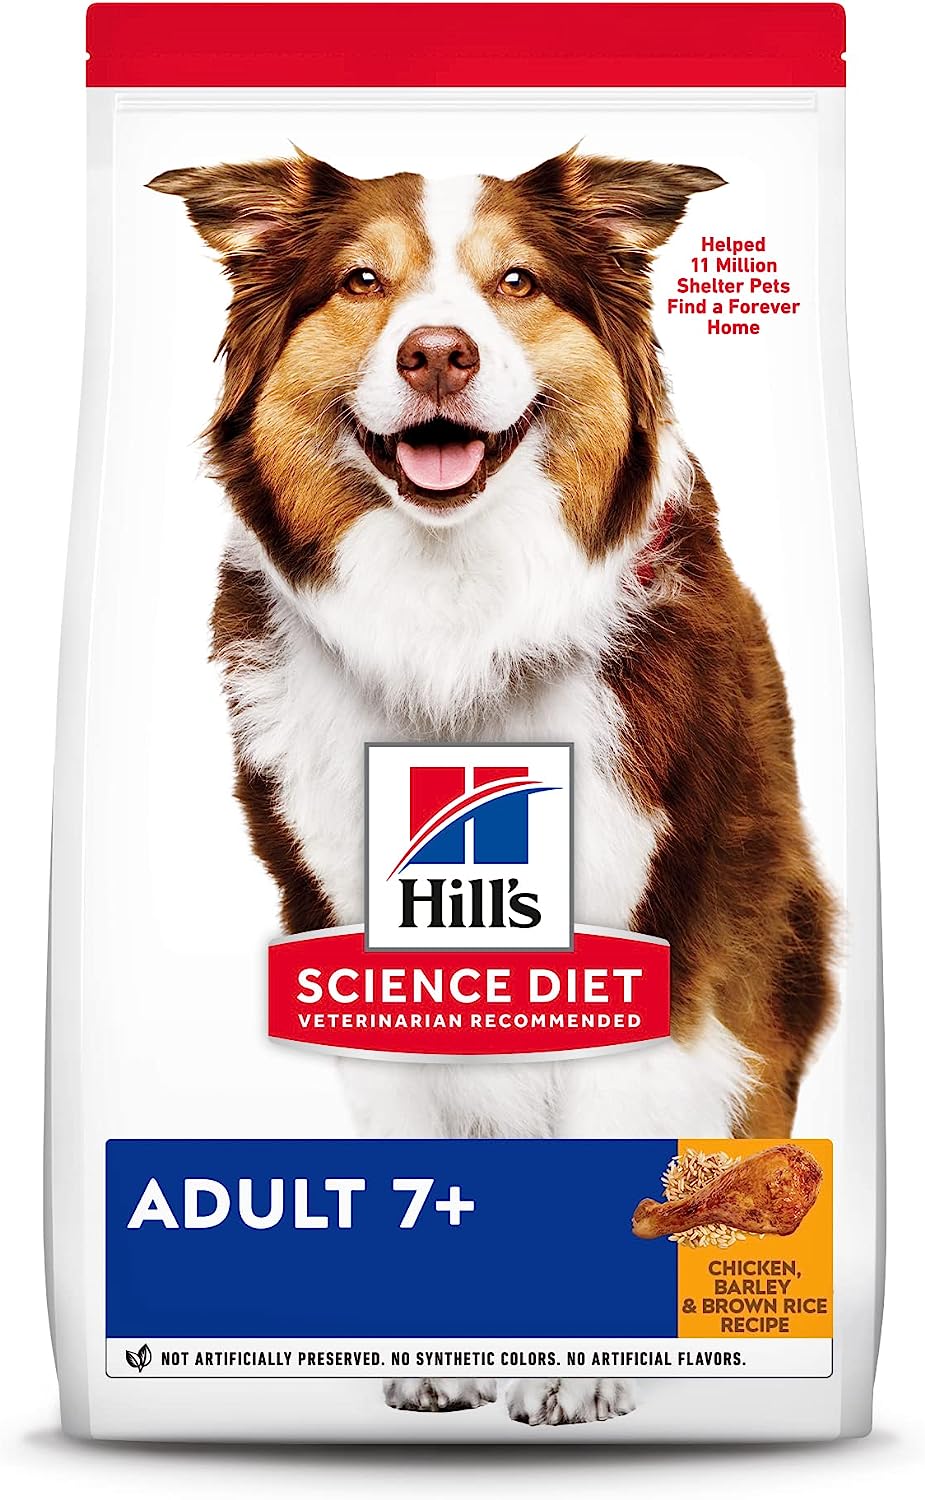 Hill’s Science Diet Adult 7+ Chicken Meal, Barley & Rice Recipe Dry Dog Food – Gallery Image 1